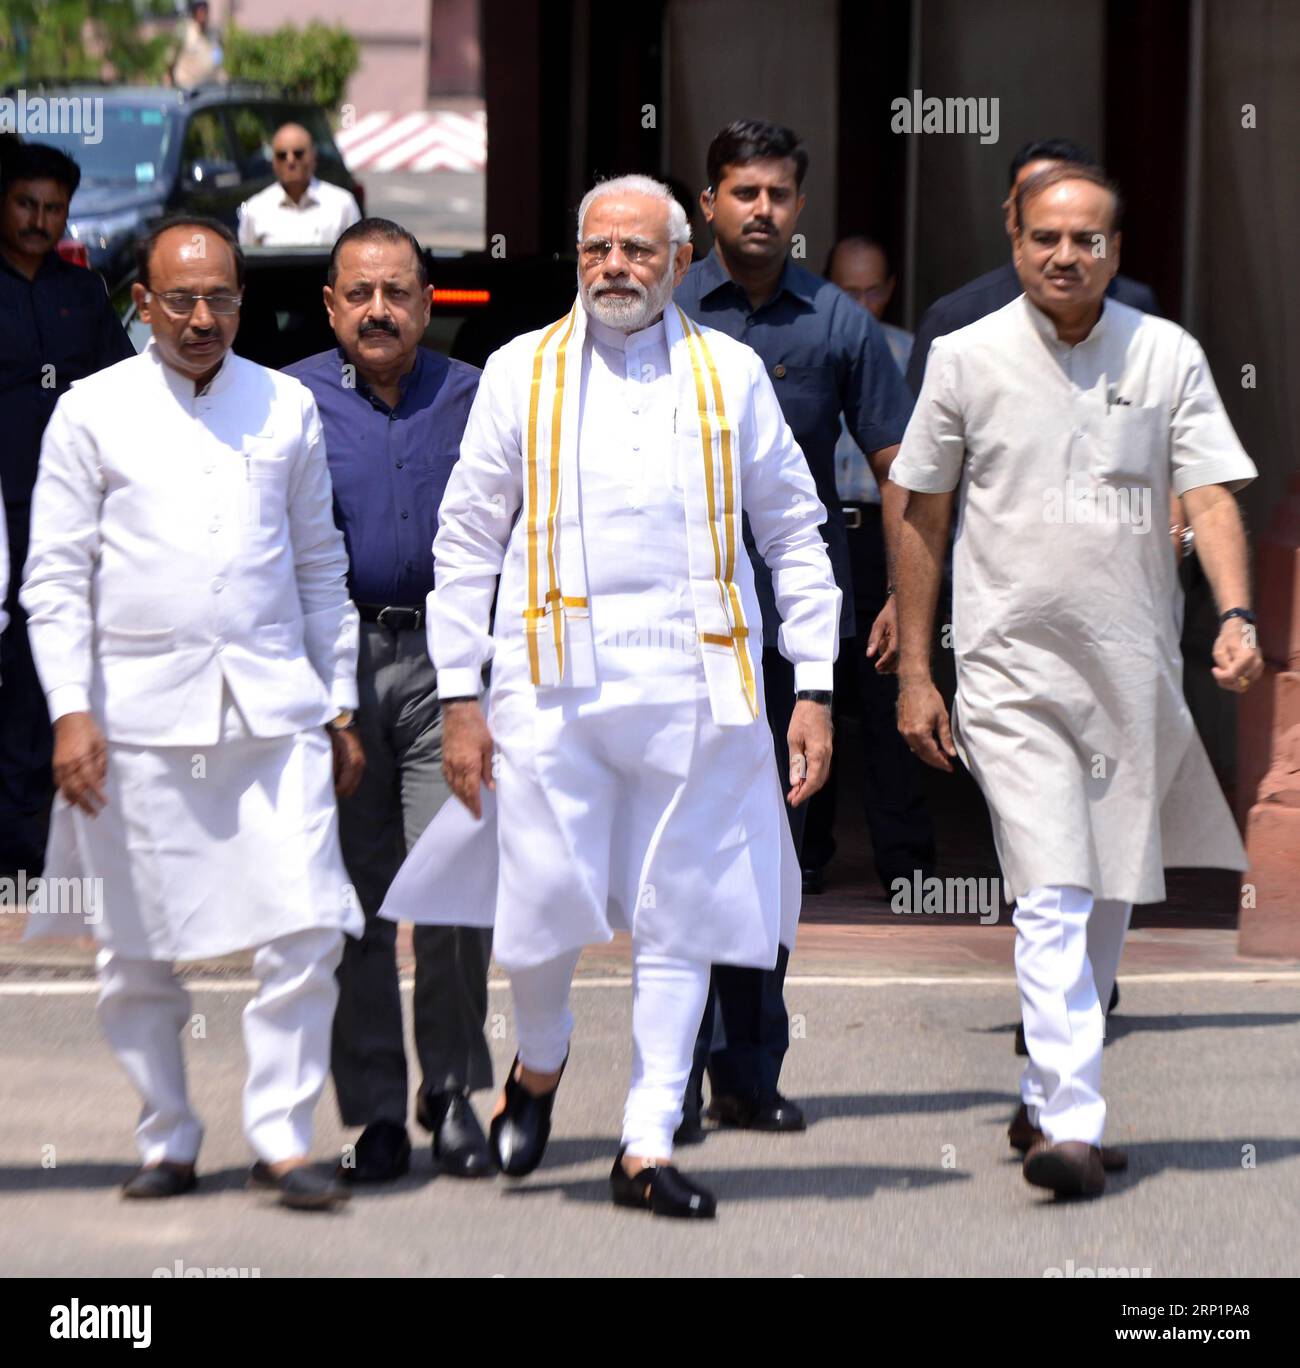 (180718) -- NEW DELHI, July 18, 2018 -- Indian Prime Minister Narendra Modi (C) arrives on the opening day of the monsoon session of parliament in New Delhi, India, July 18, 2018. The monsoon session of parliament began on Wednesday and continue until August 10. ) (rh) INDIA-NEW DELHI-MONSOON SESSION ParthaxSarkar PUBLICATIONxNOTxINxCHN Stock Photo